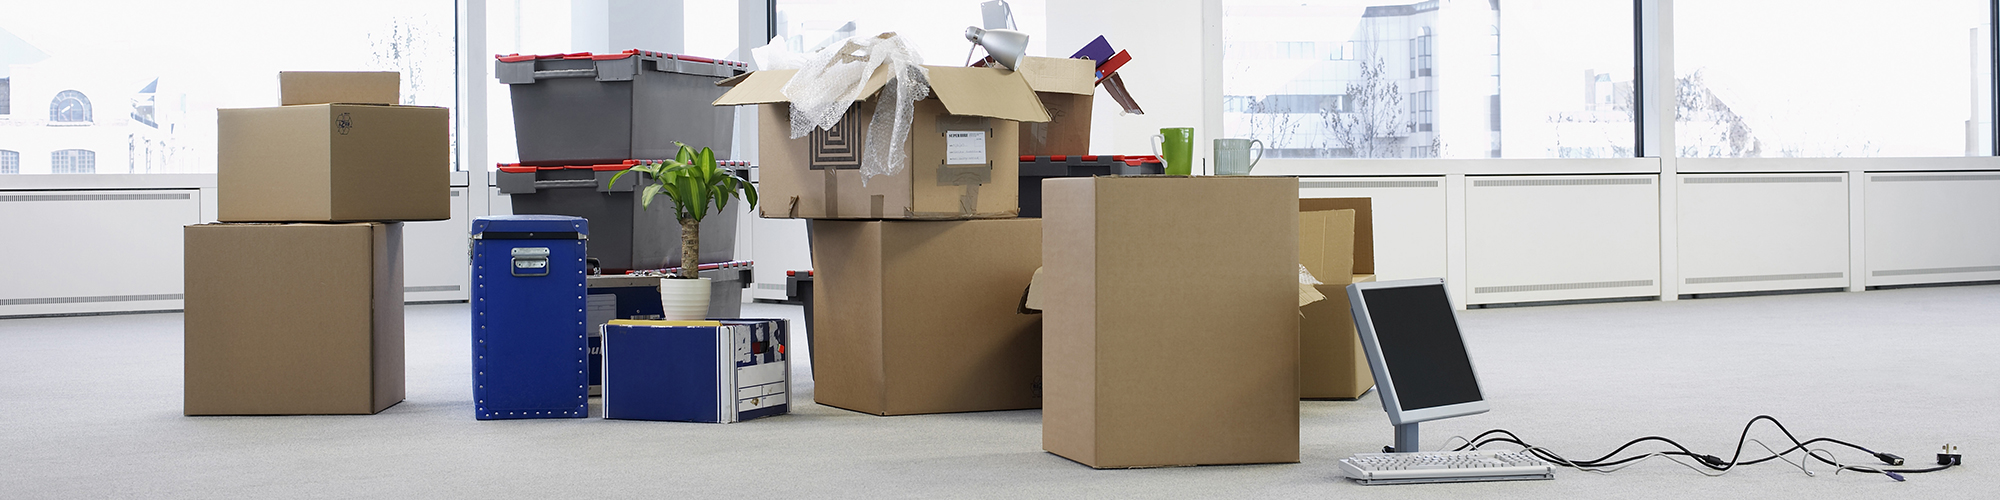 Office Relocation Services in Charlotte, NC